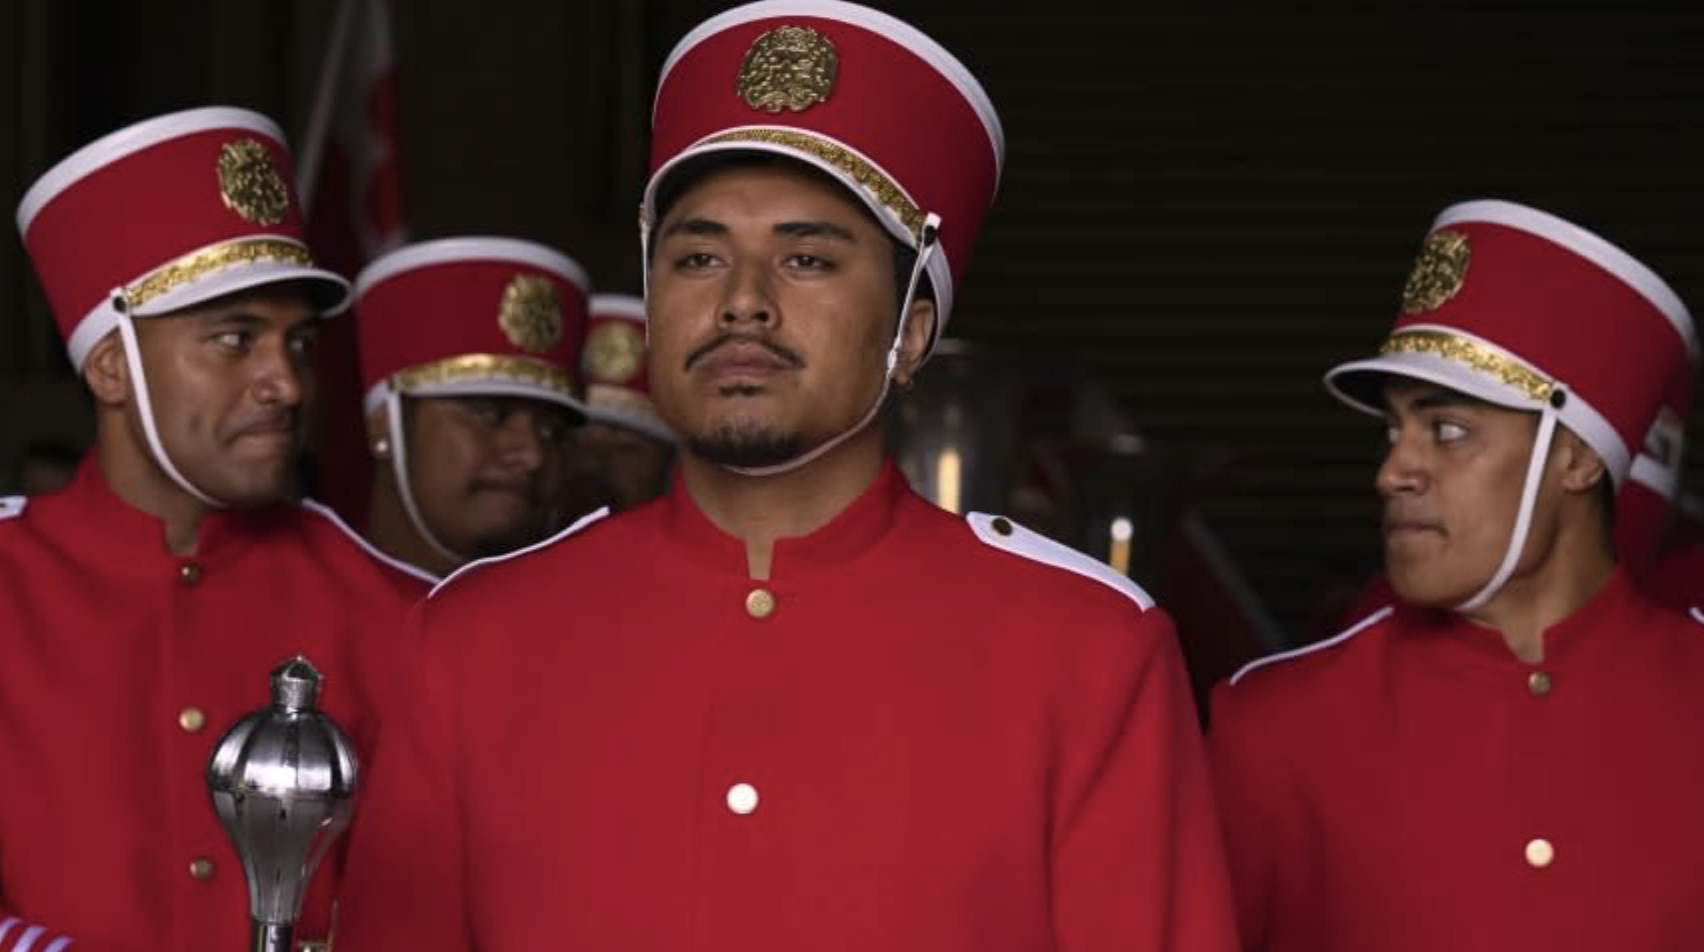 Three men in red band uniforms. Image from 'Red, White and Brass' film.